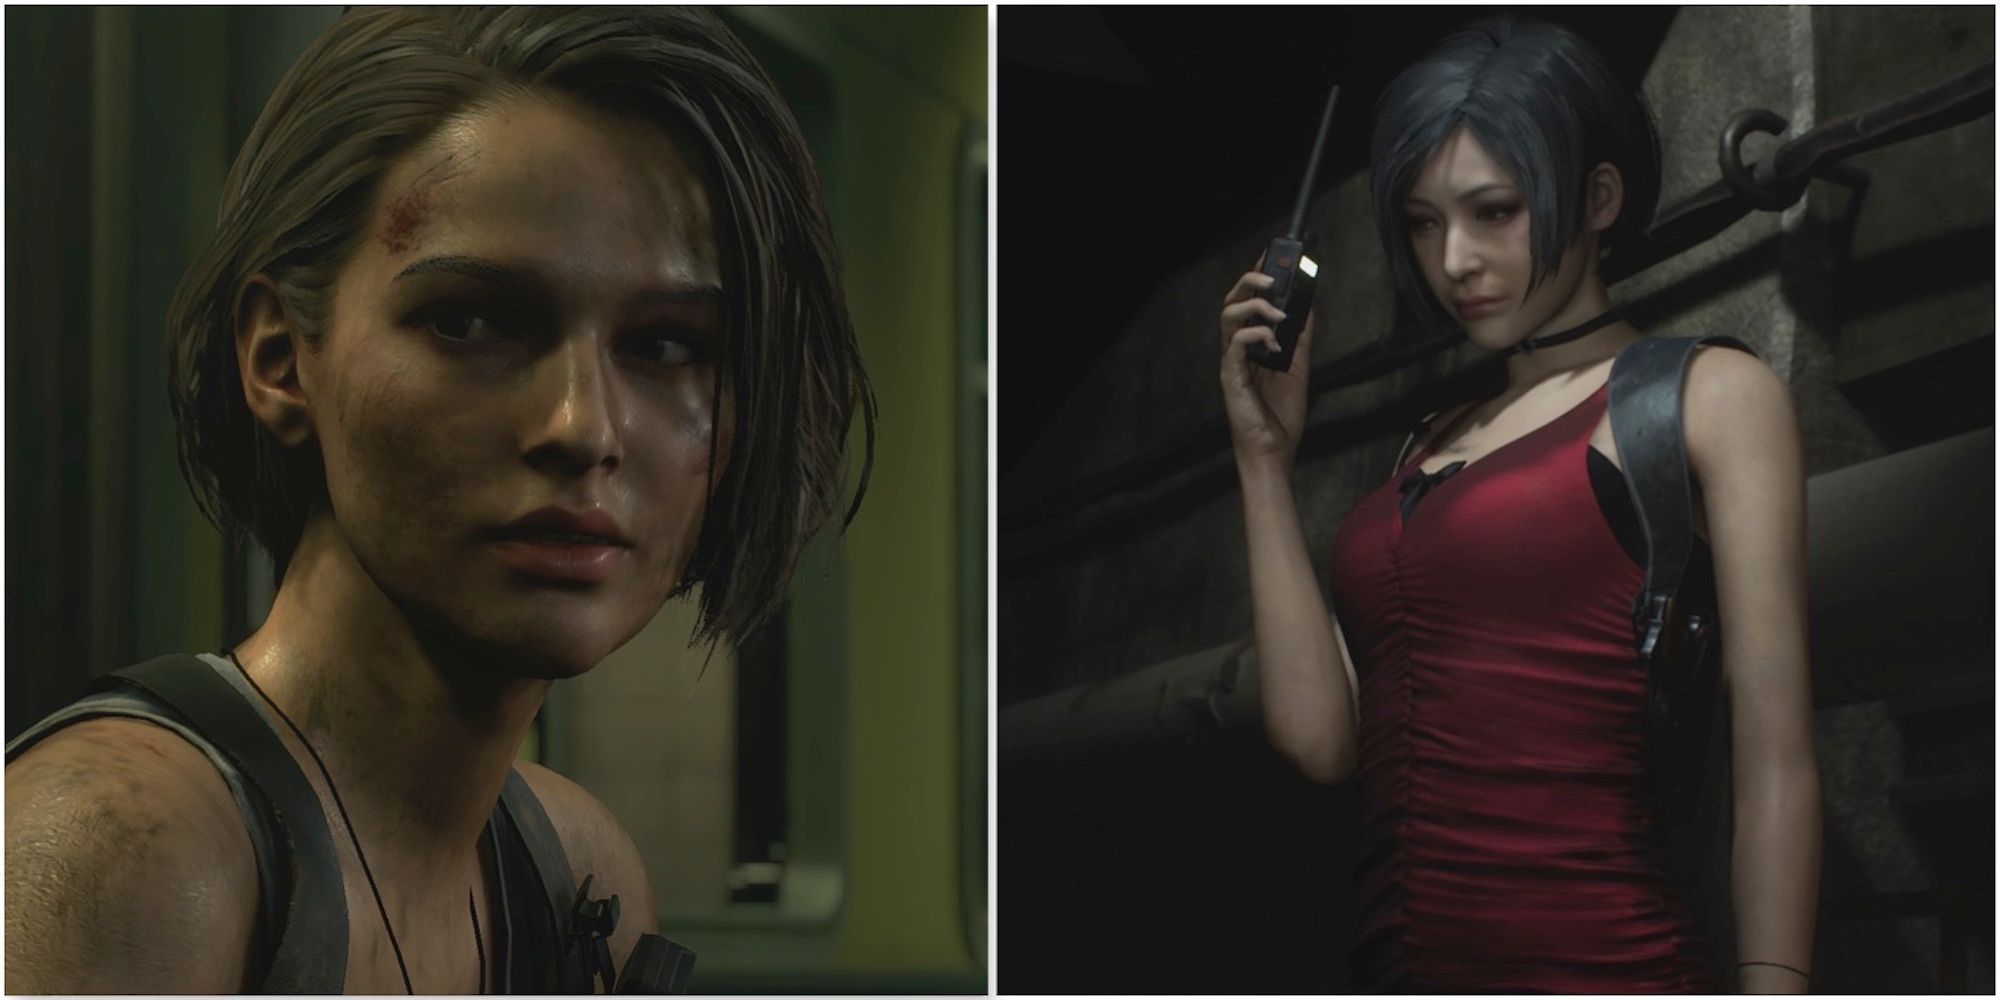 Jill Valentine from Resident Evil 3 and Ada Wong from Resident Evil 2